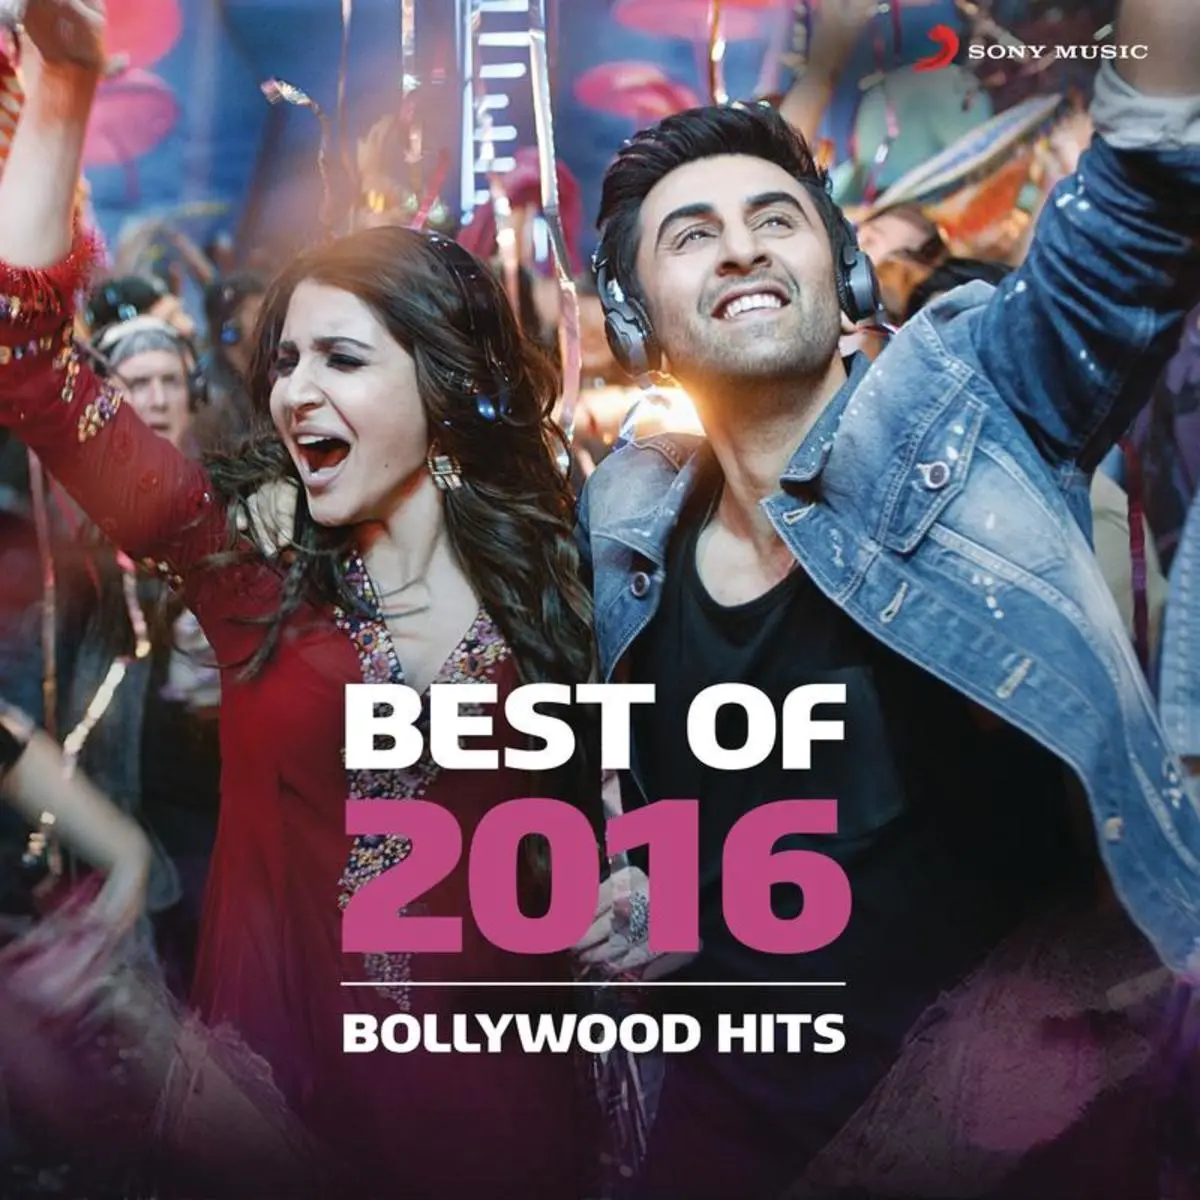 The Breakup Song From Ae Dil Hai Mushkil Lyrics In Hindi Best Of 2016 The Breakup Song From Ae Dil Hai Mushkil Song Lyrics In English Free Online On Gaana Com Breakup song, breakup song karde dil ki feeling strong saade chaar minute long breakup song, breakup song. the breakup song from ae dil hai